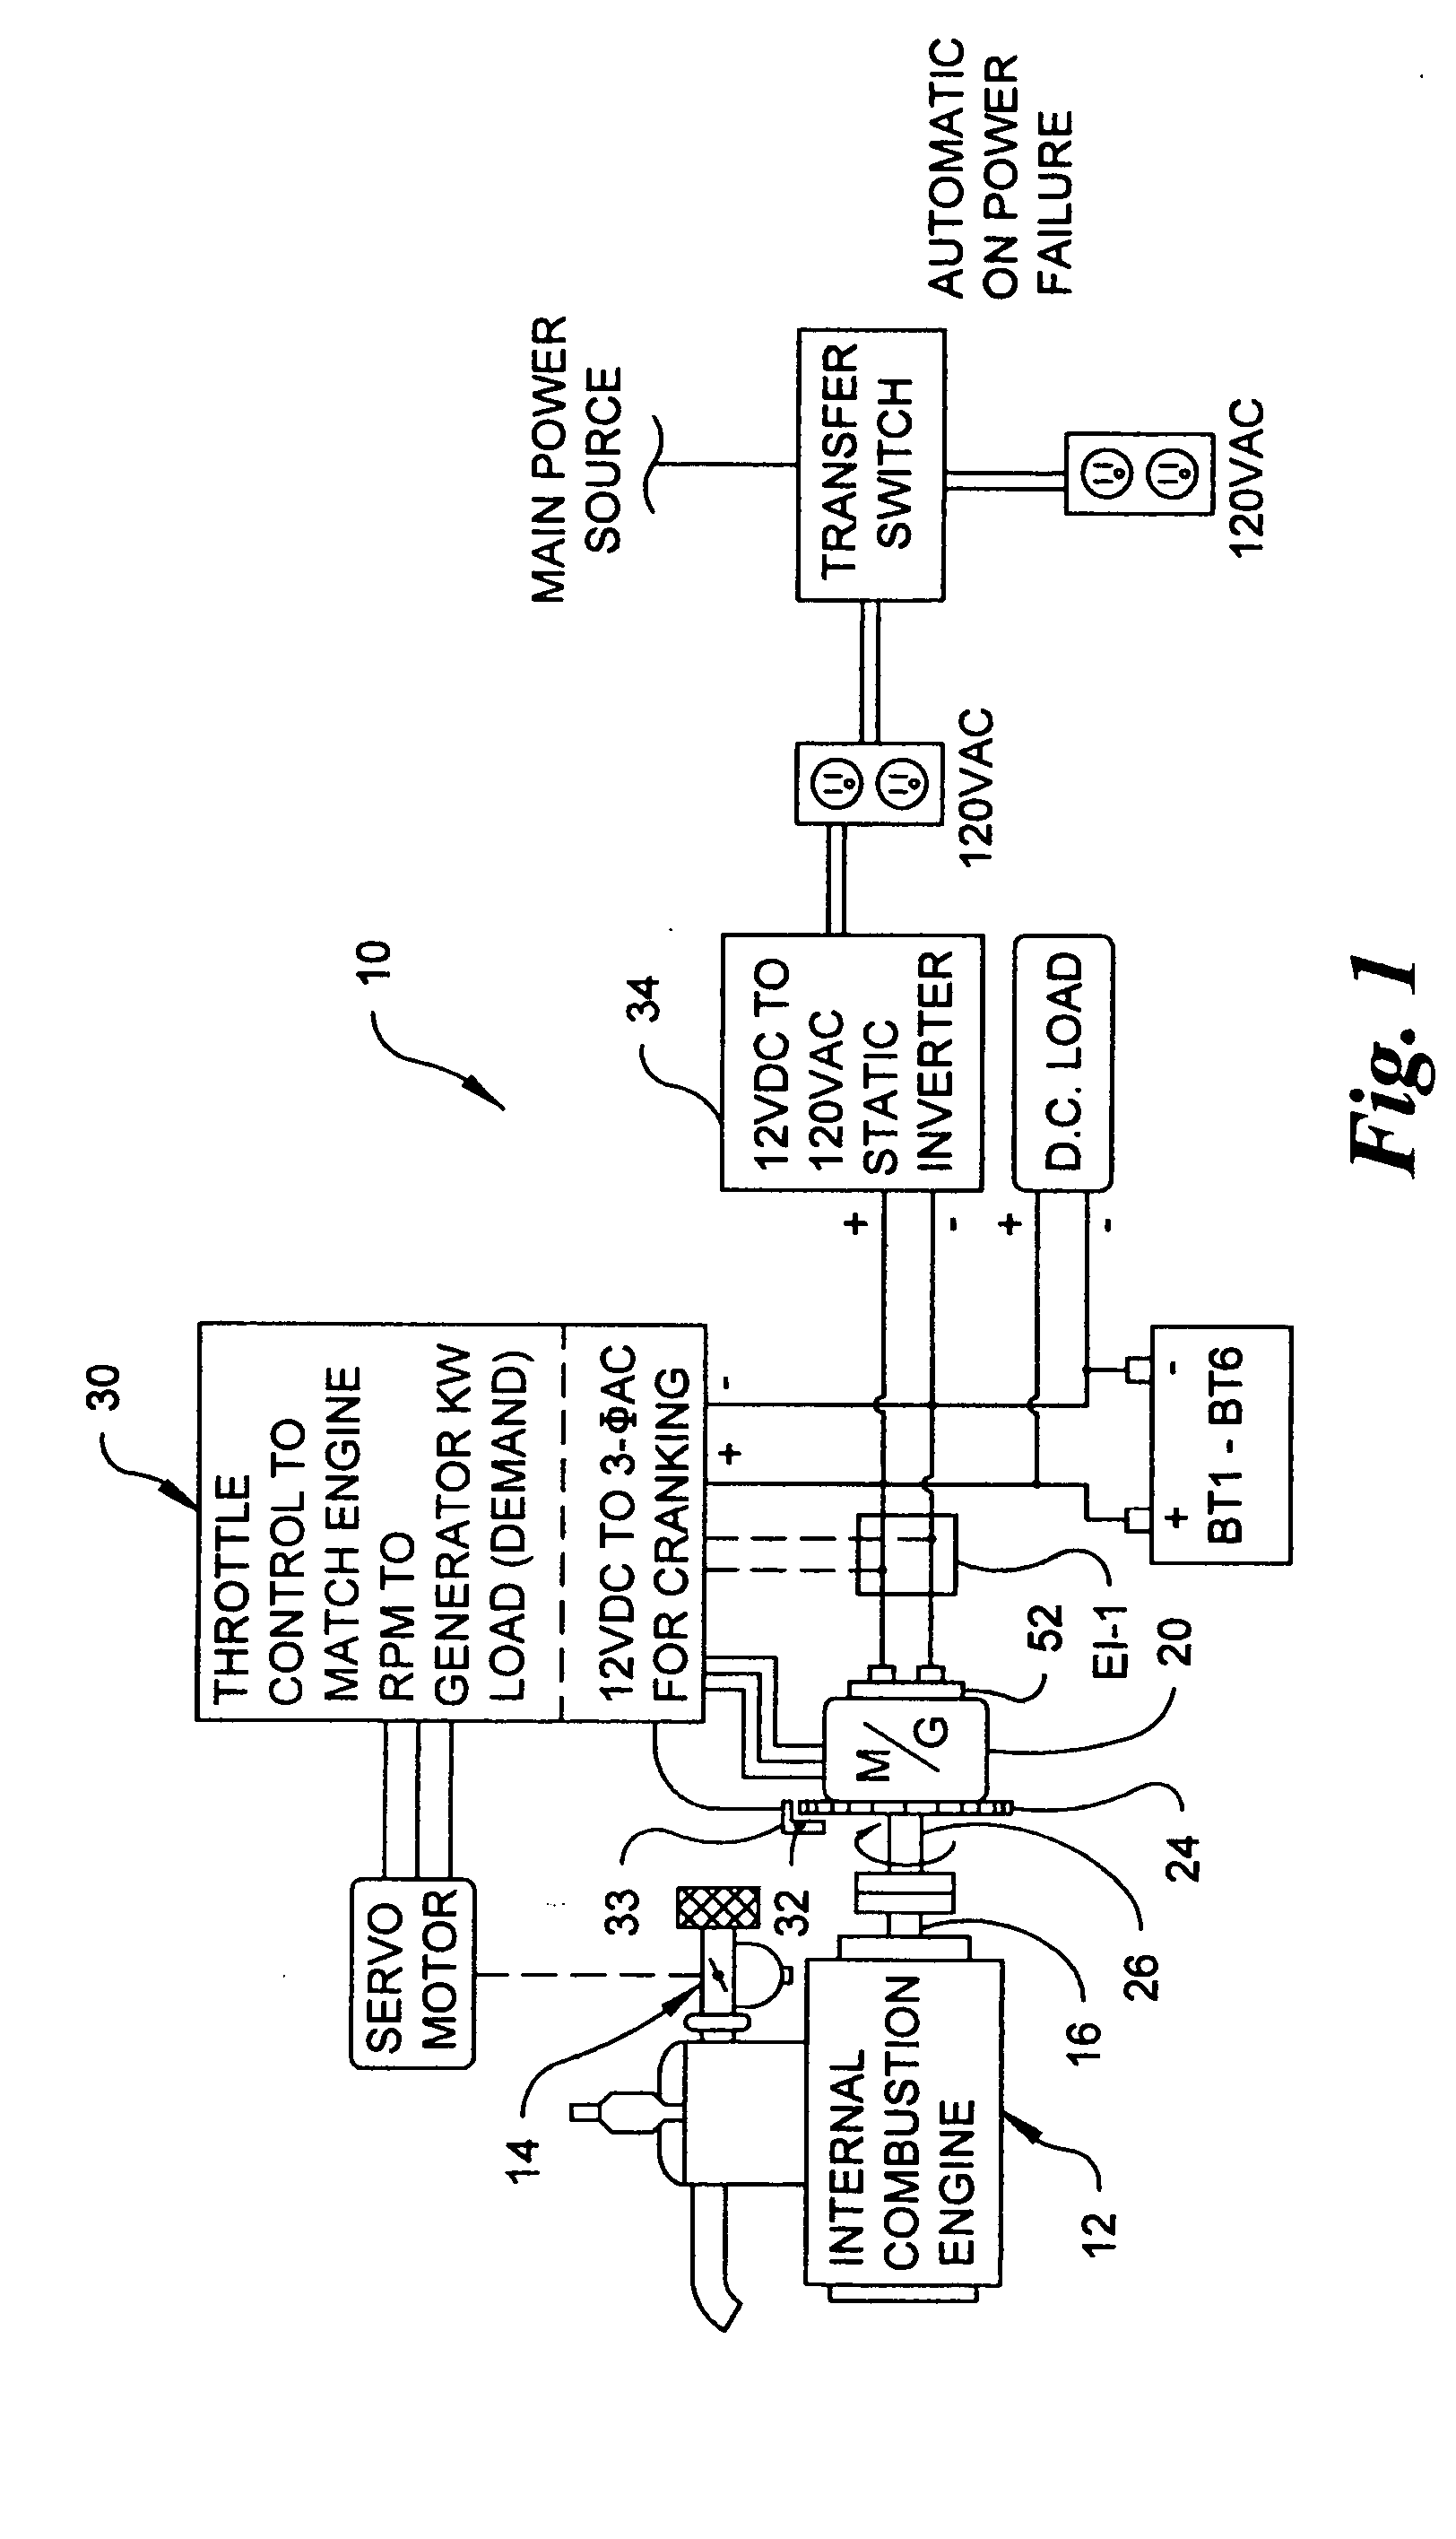 Phase angle control for synchronous machine control